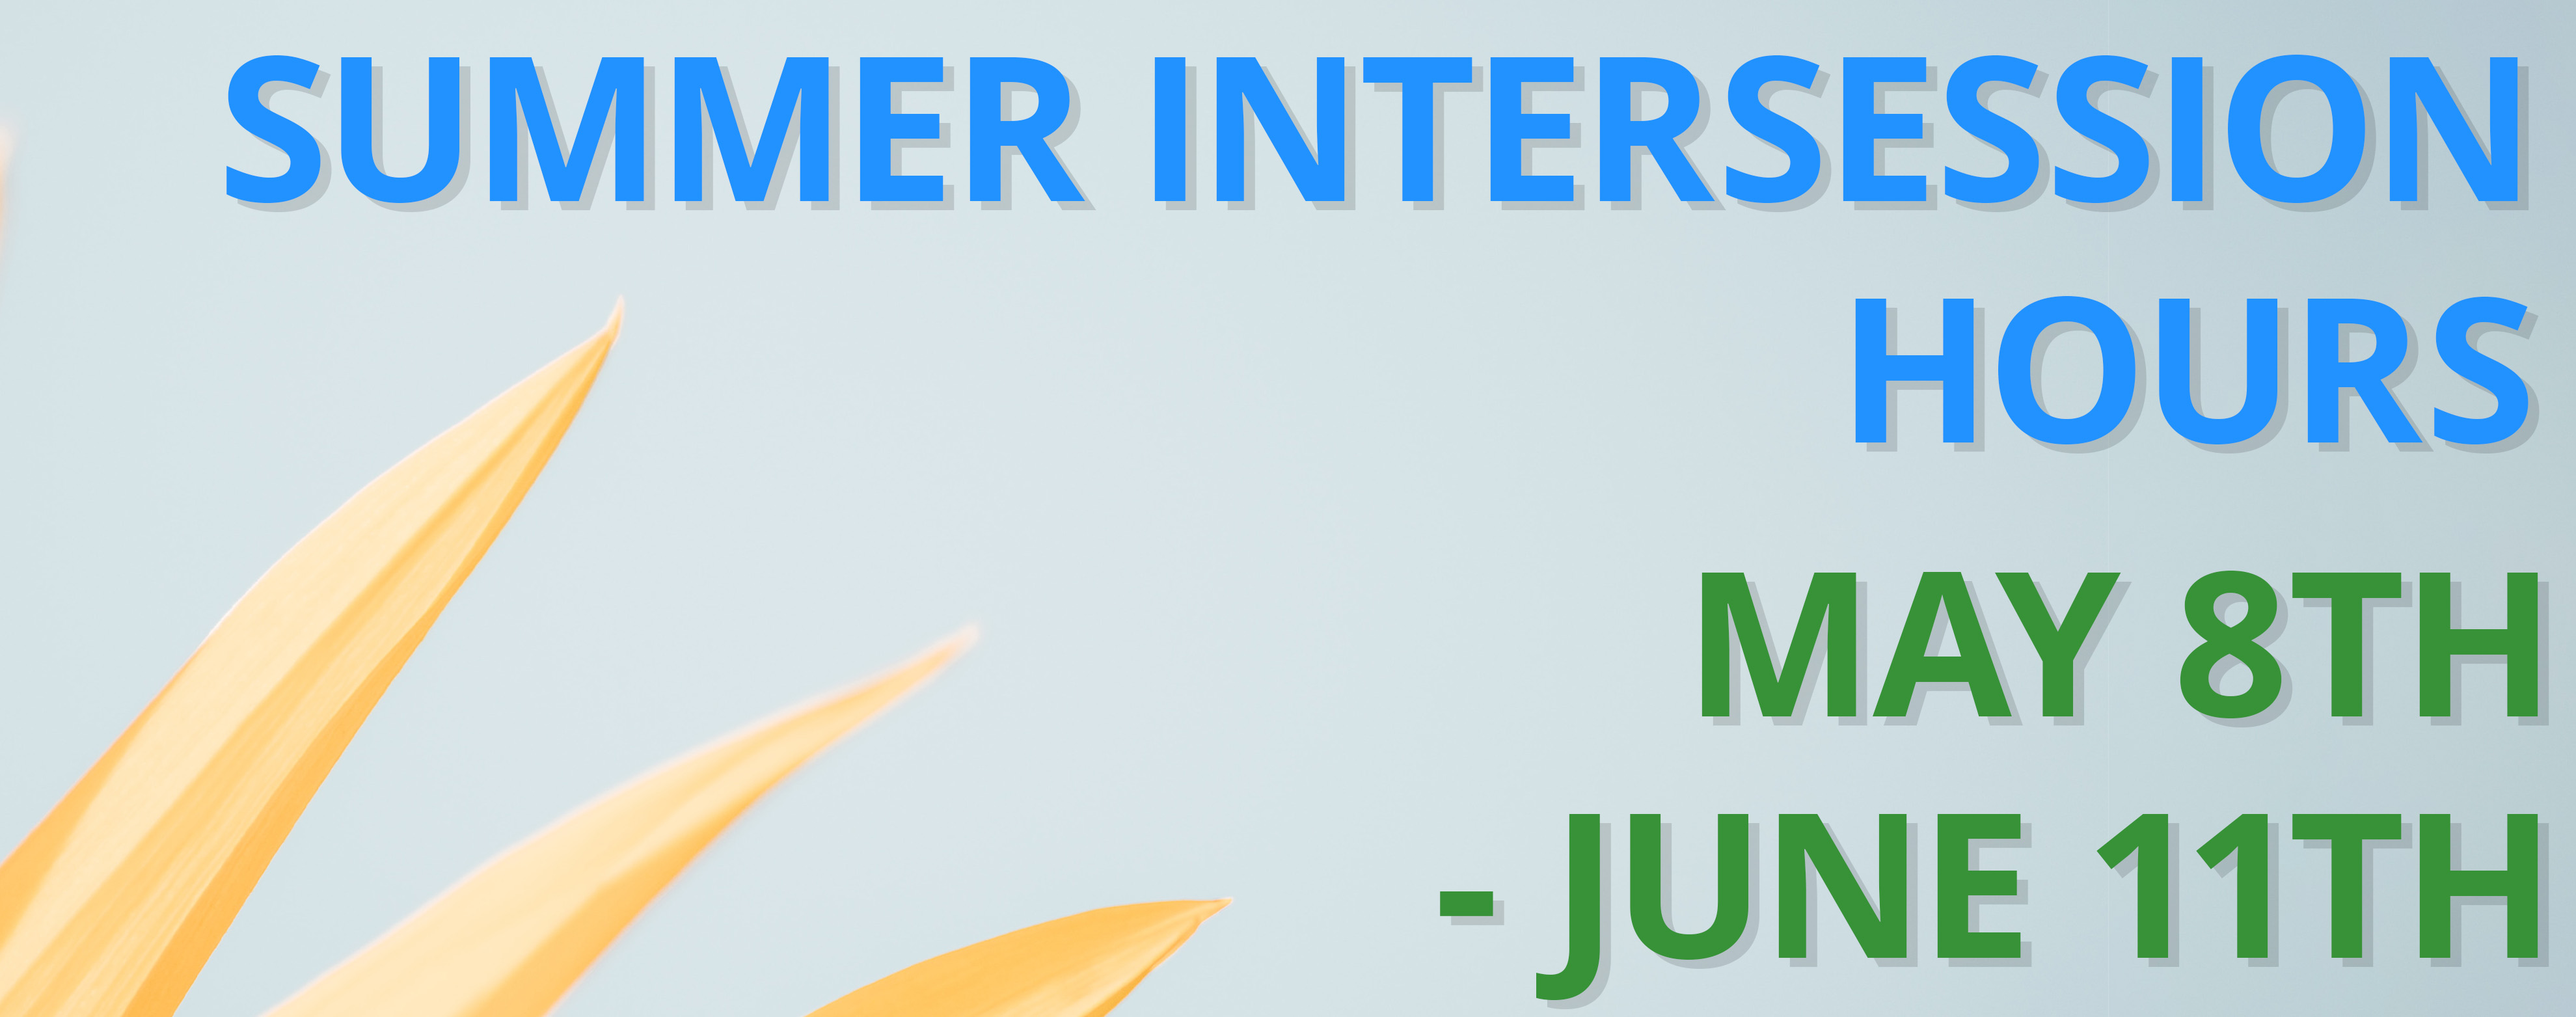 Summer Intersession Hours 